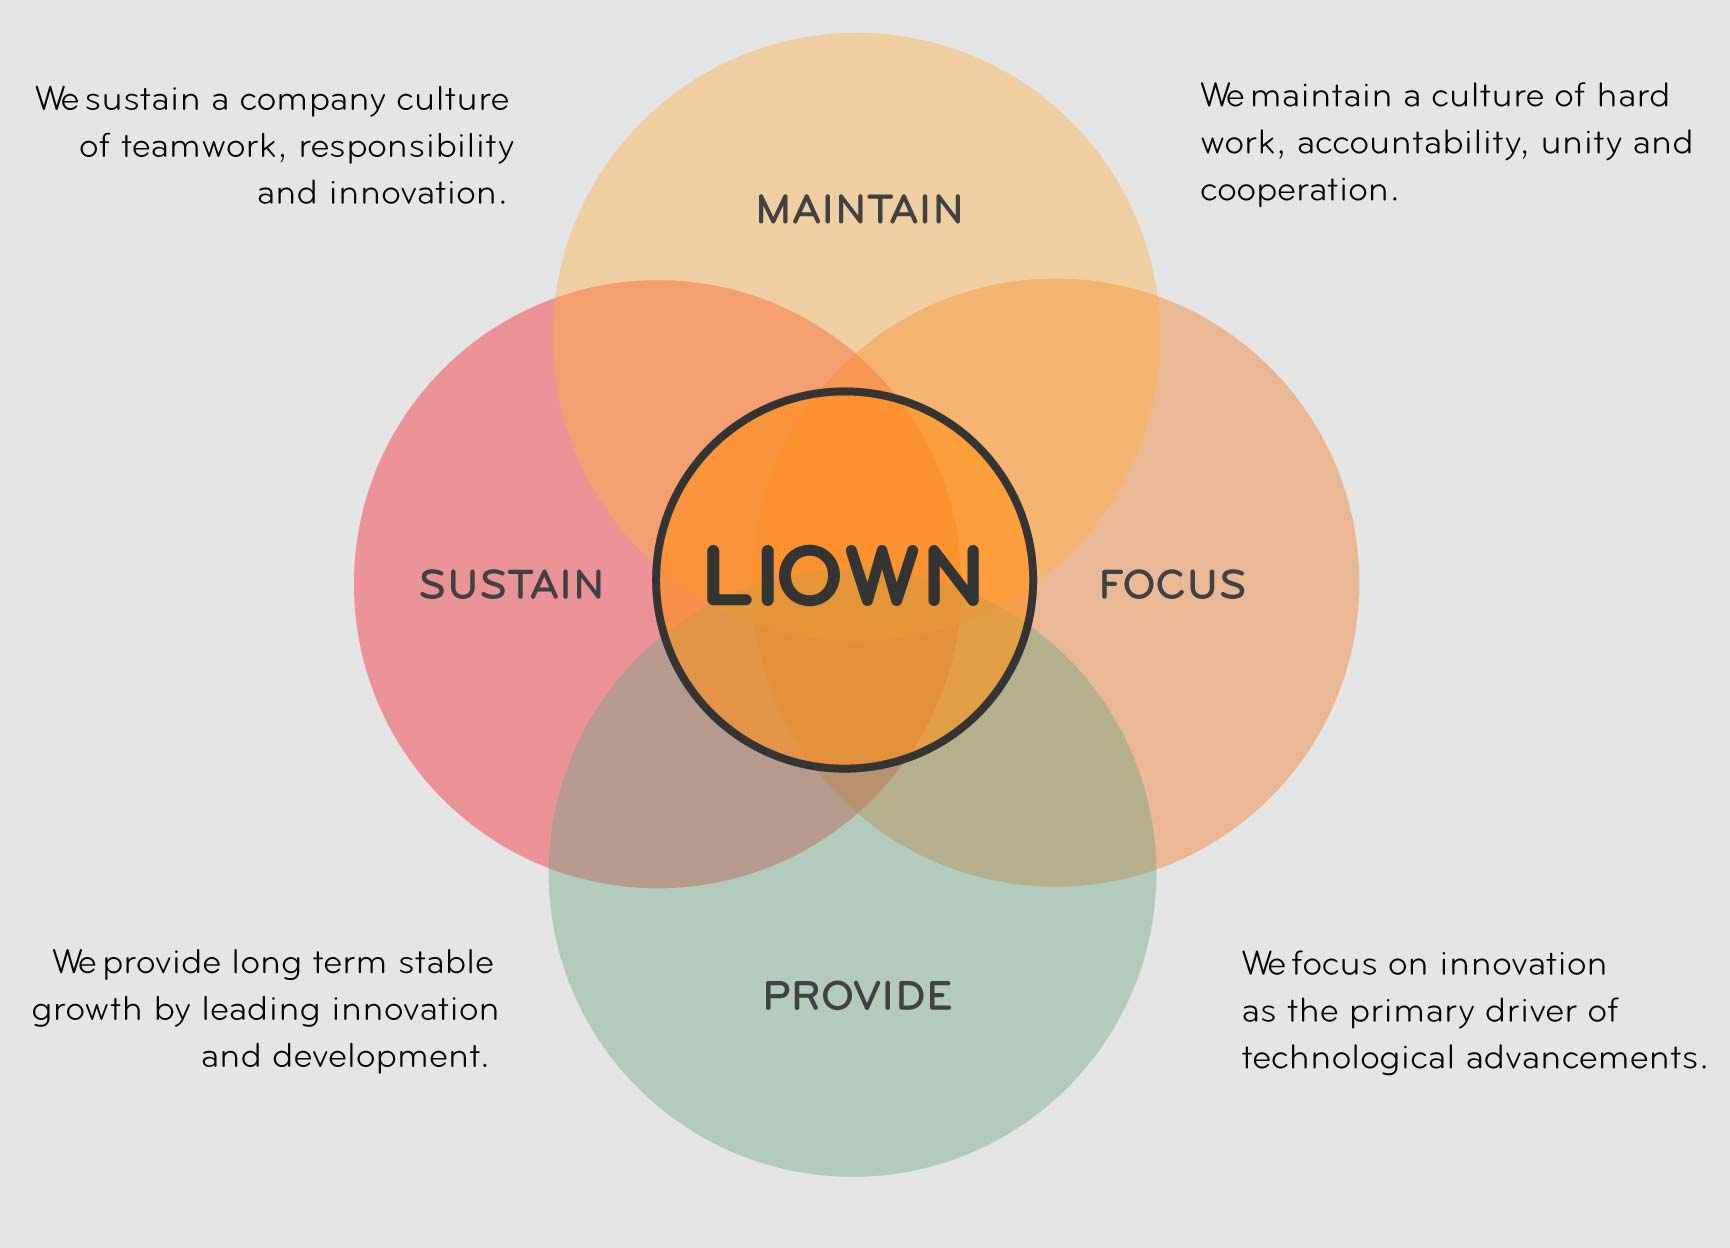 CORE BELIEFS: To sustain a company culture of teamwork, responsibility and innovation. To maintain a culture of hard work, accountability, unity and cooperation. To provide long term stable growth by leading innovation and development. To focus on innovation as the primary driver of technological advancements.